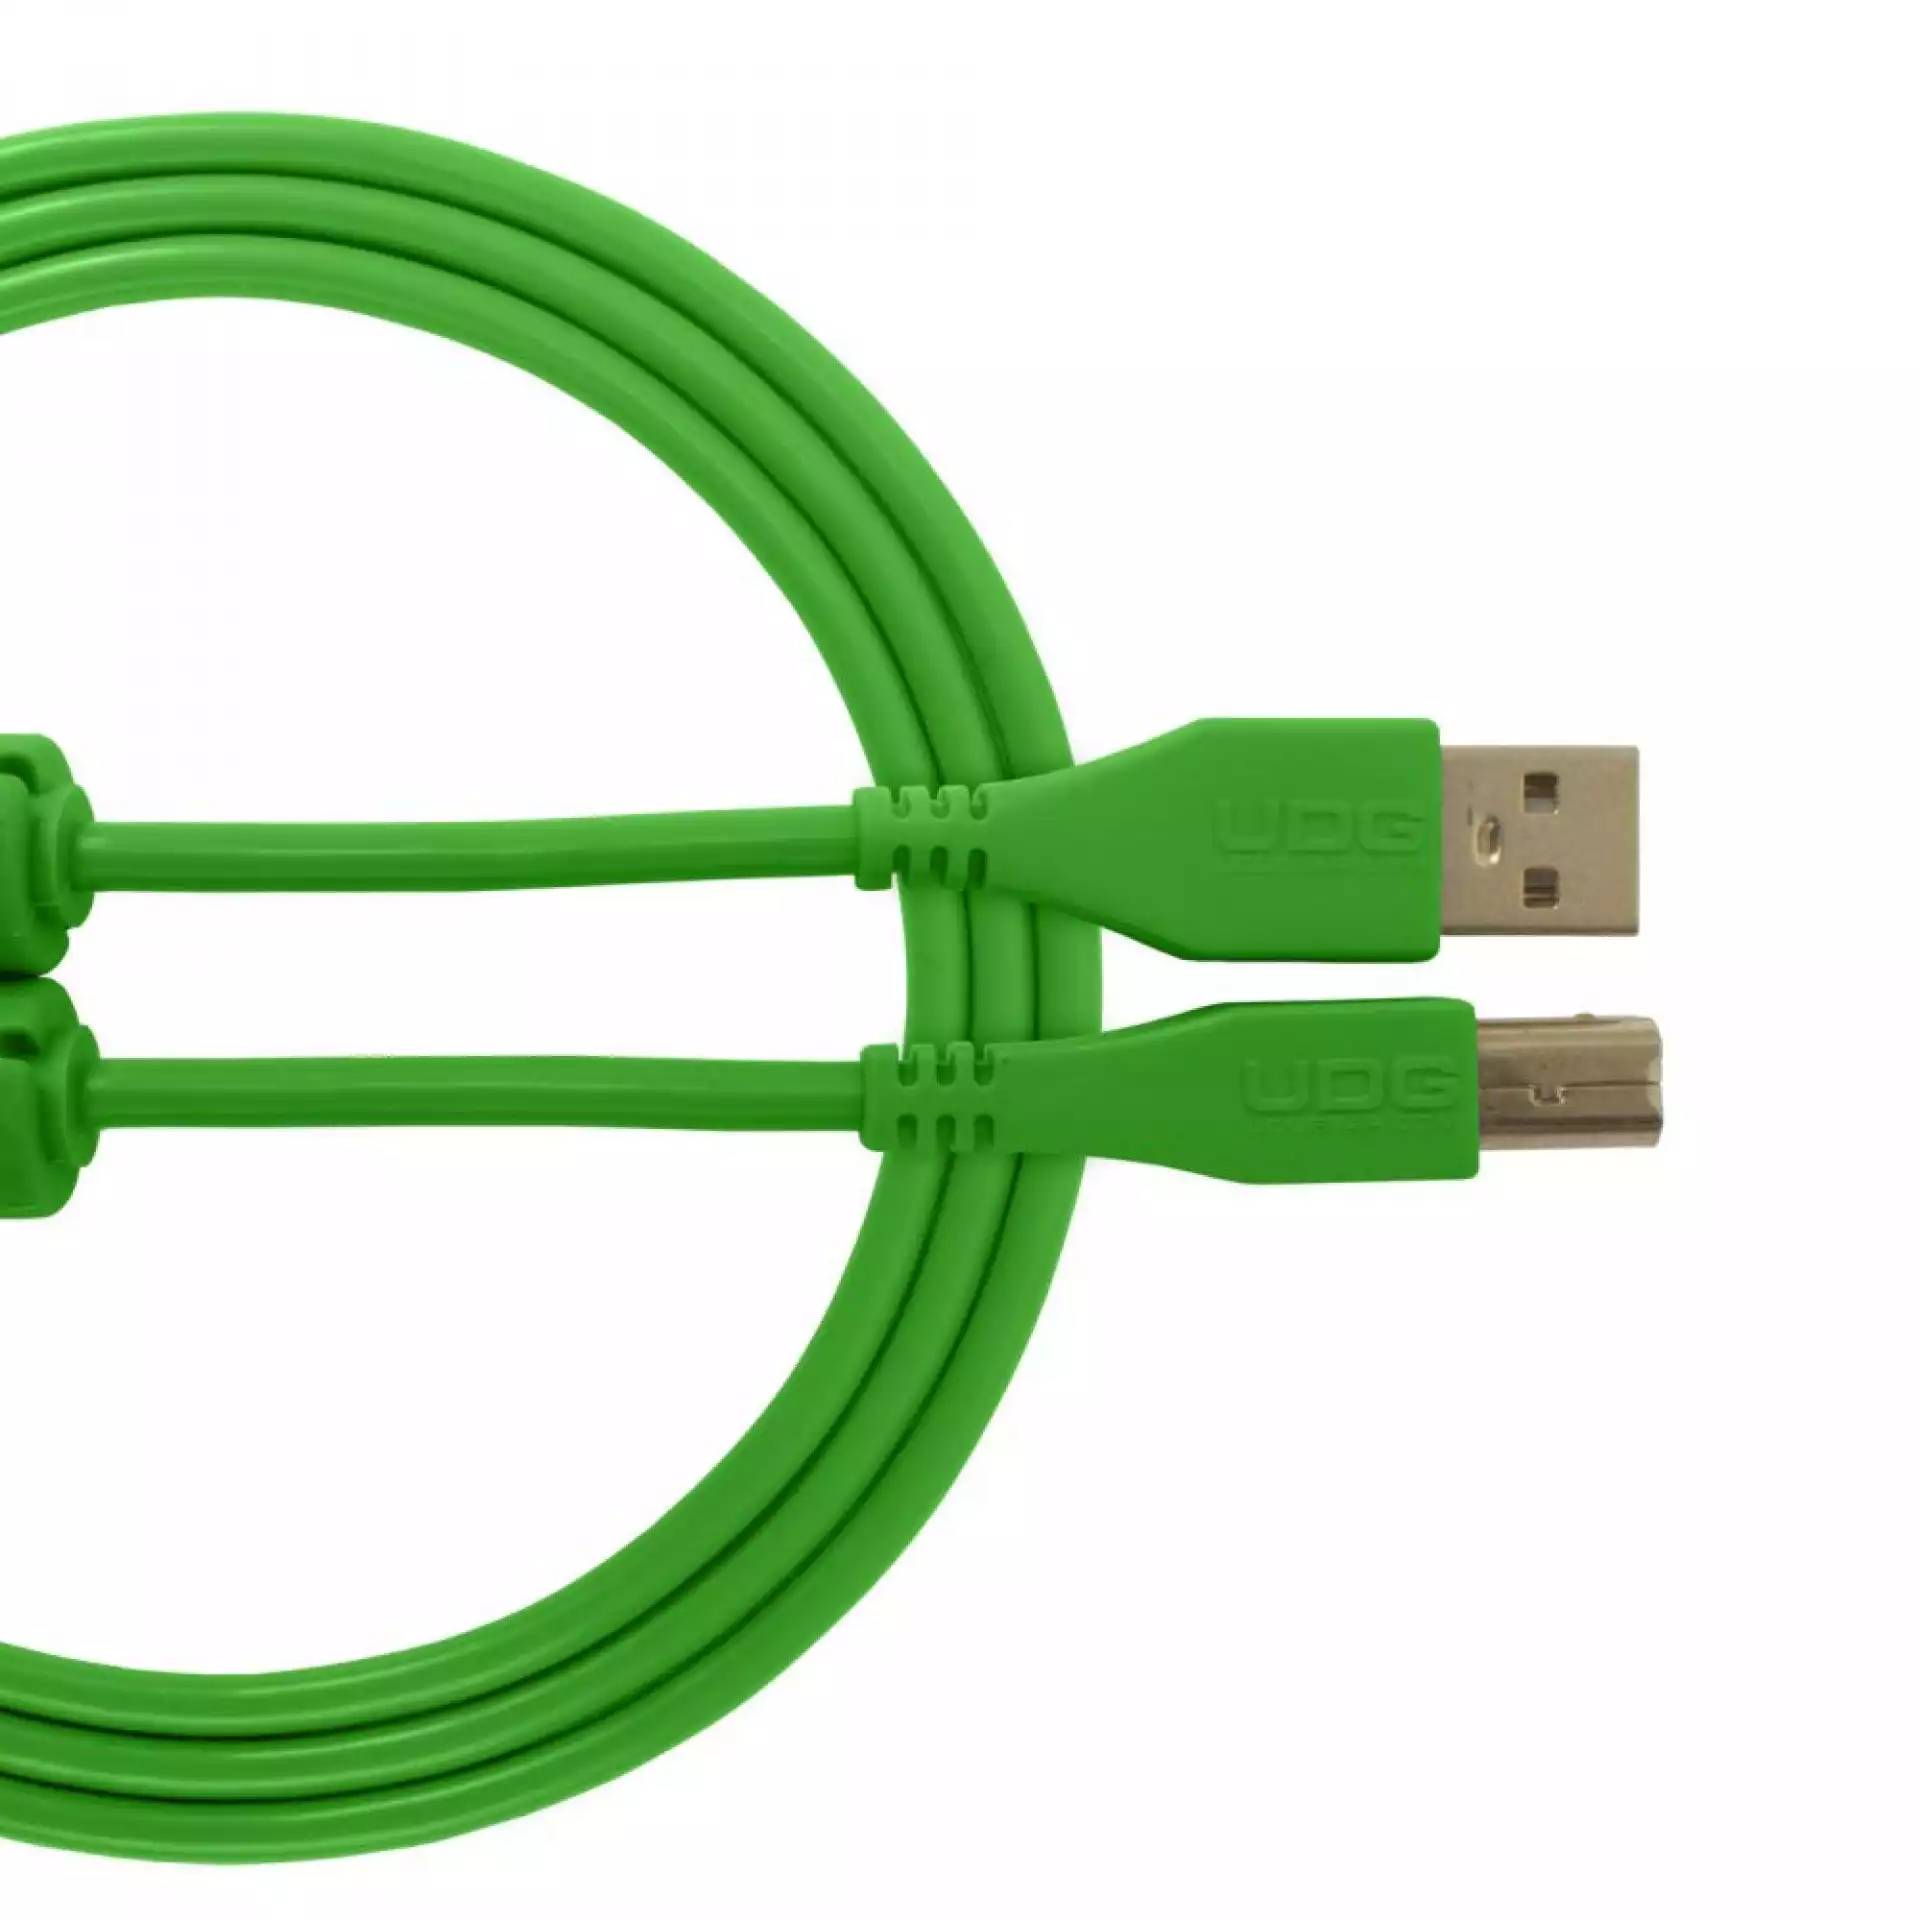 UDG Ultimate Audio Cable USB 2.0 A-B Green Straight 2m